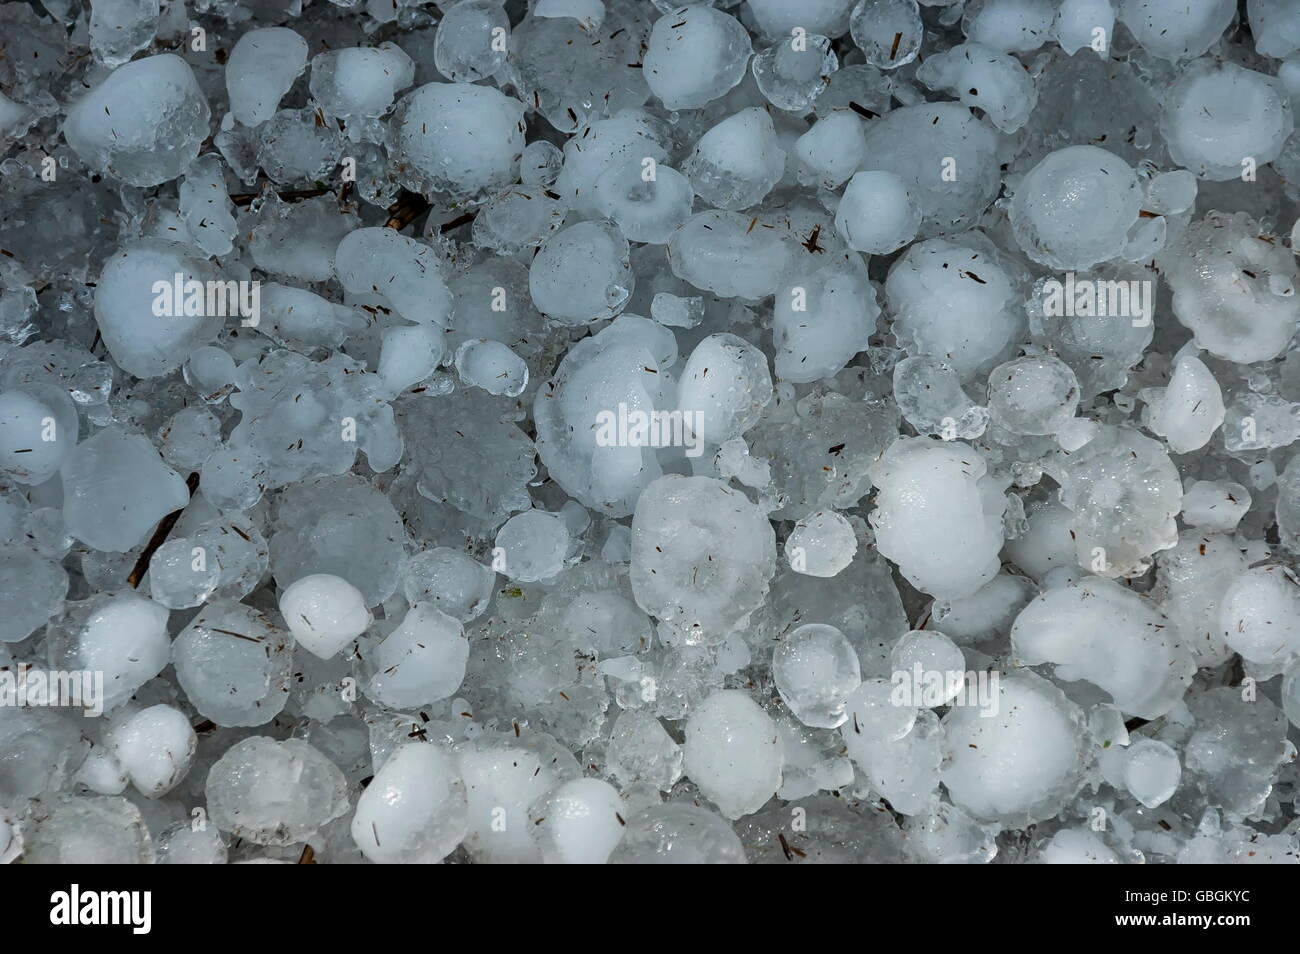 Big quantity of ice ball over the grass in garden, South Africa Stock Photo